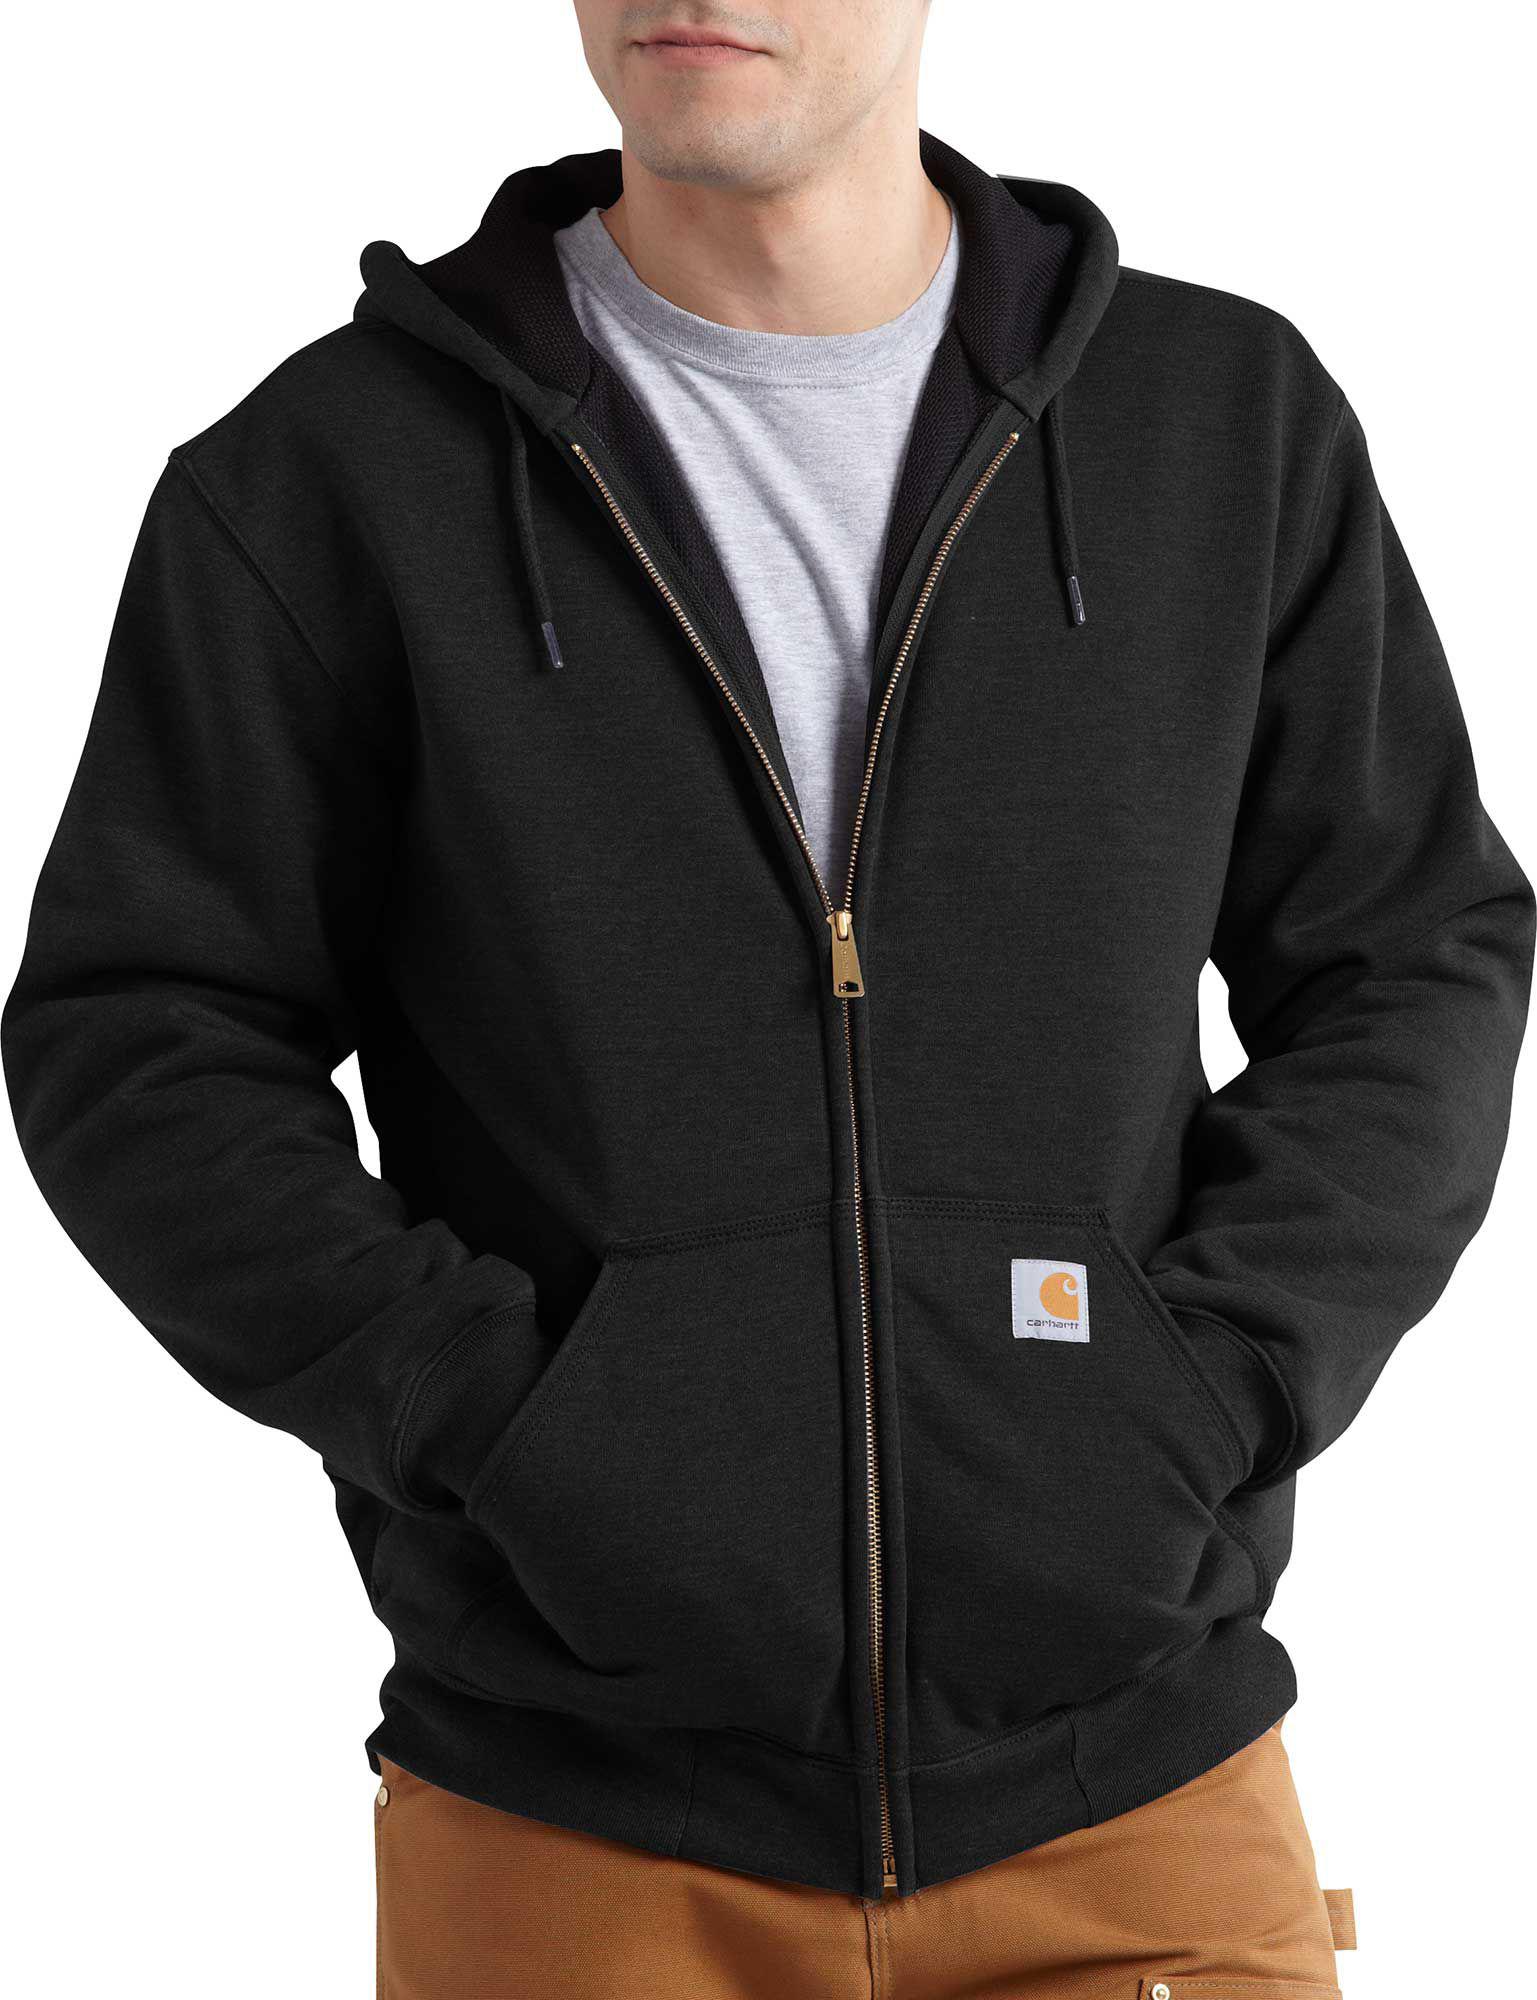 Carhartt Synthetic Rutland Thermal Lined Hoodie in Black for Men - Lyst